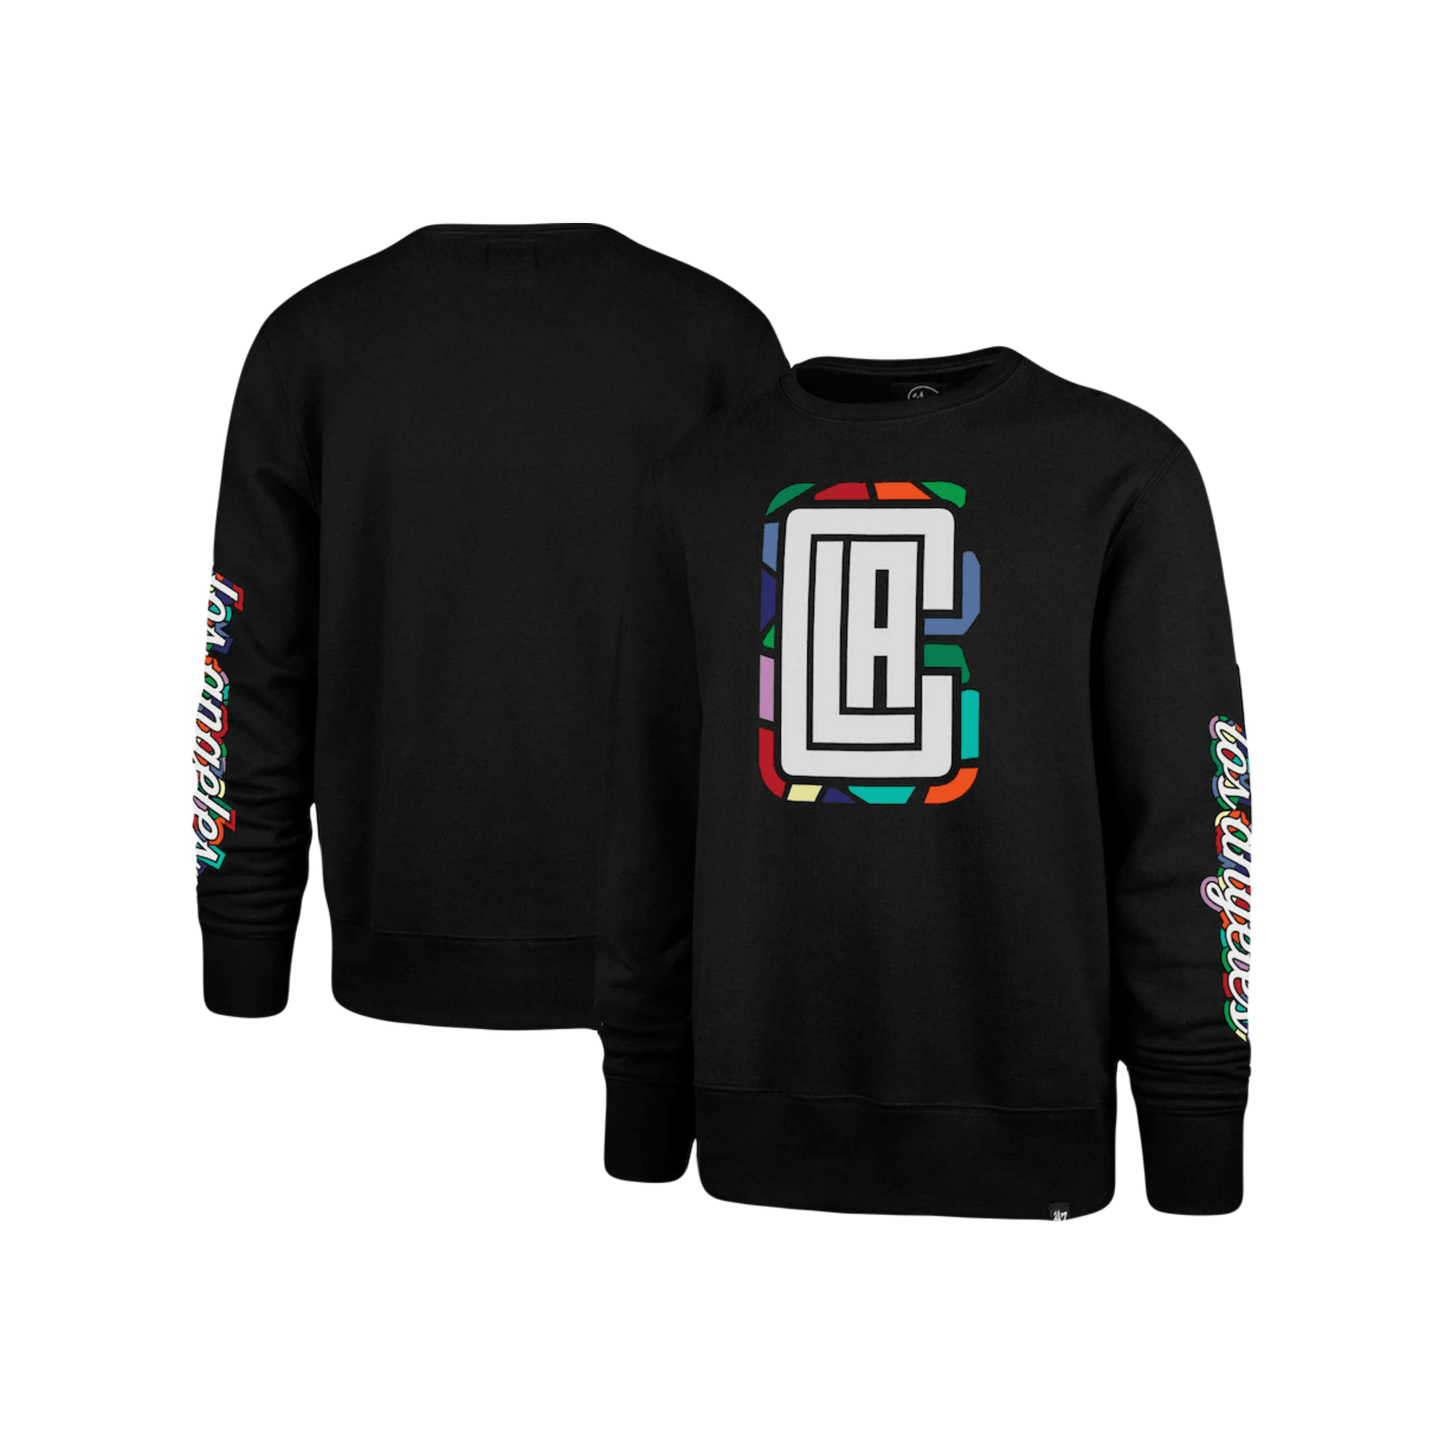 Los Angeles Clippers NBA City Edition 47’ Long-Sleeve Shirt